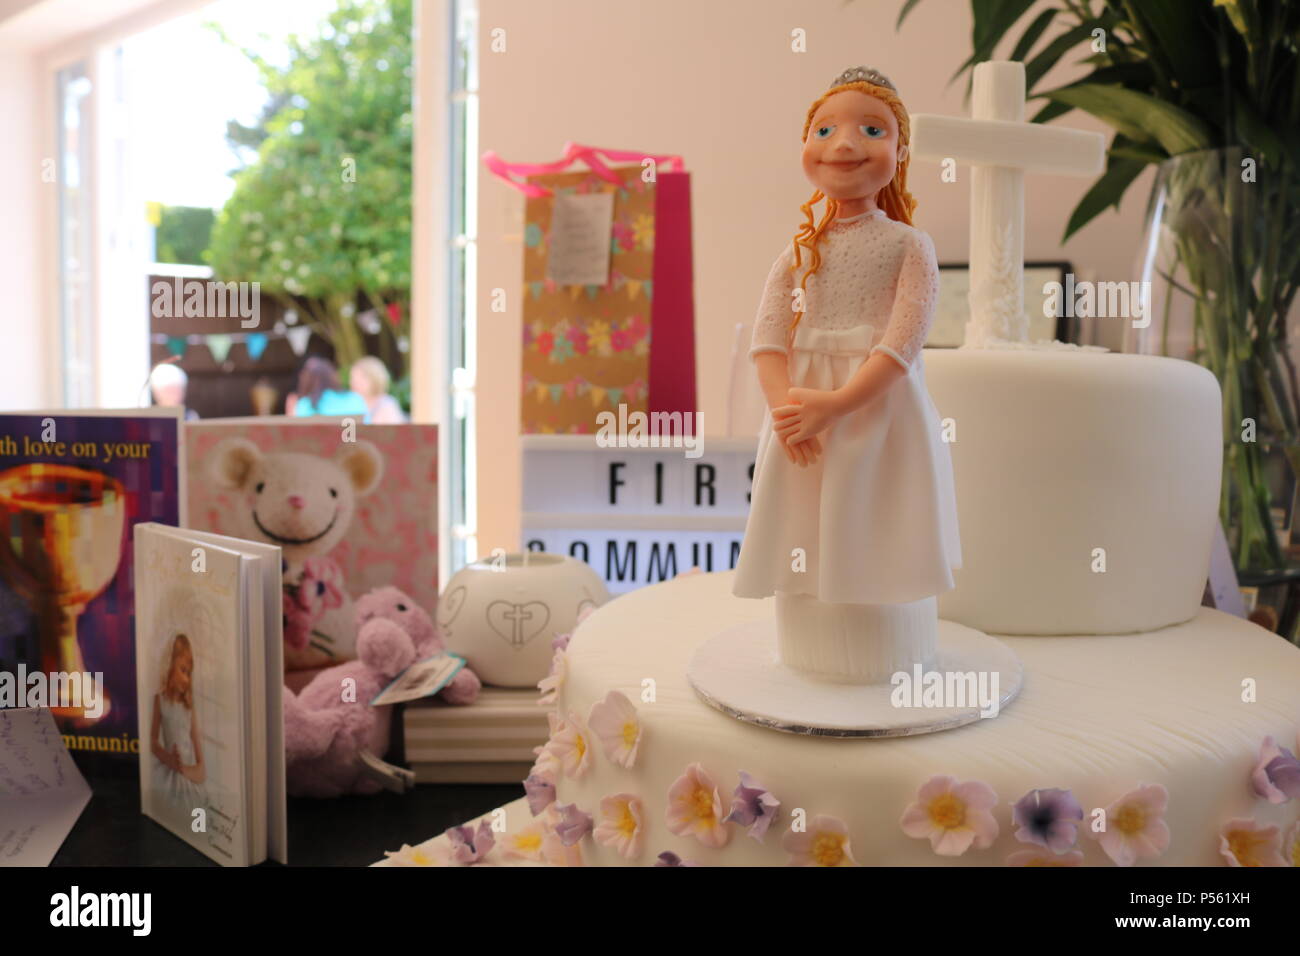 Two tier Catholic first communion cake with icing figure of a girl, white cross and lilac and lemon flowers and light box saying first communiom Stock Photo